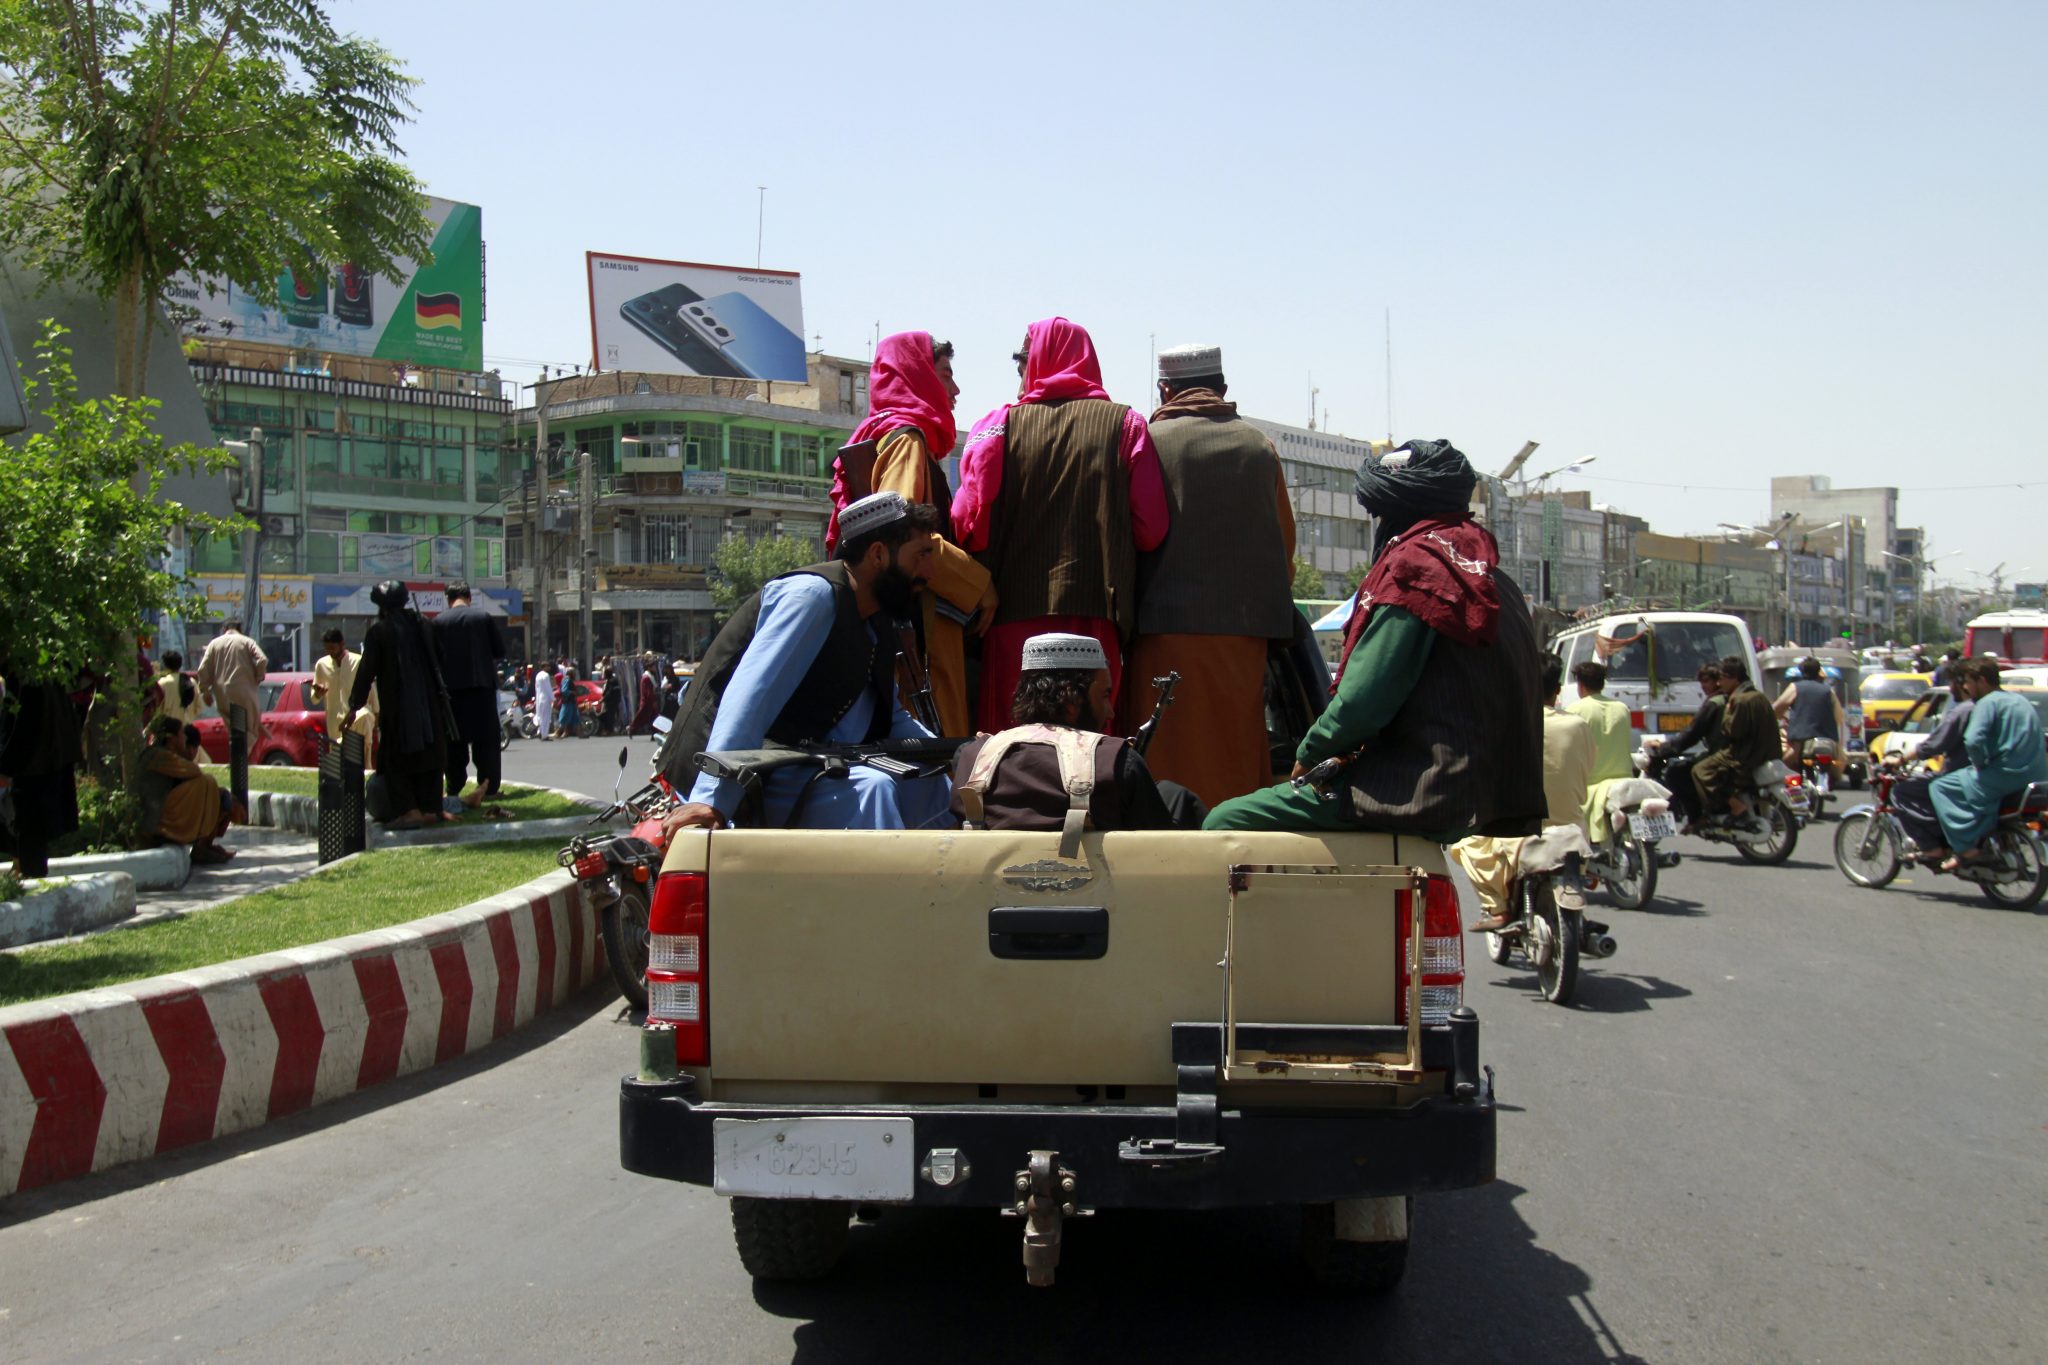 Taliban fighters sit on the back of a vehicle in the city of Herat, west of Kabul, Afghanistan, 14-08-2021. Image: Hamed Sarfarazi/AP/Press Association Images